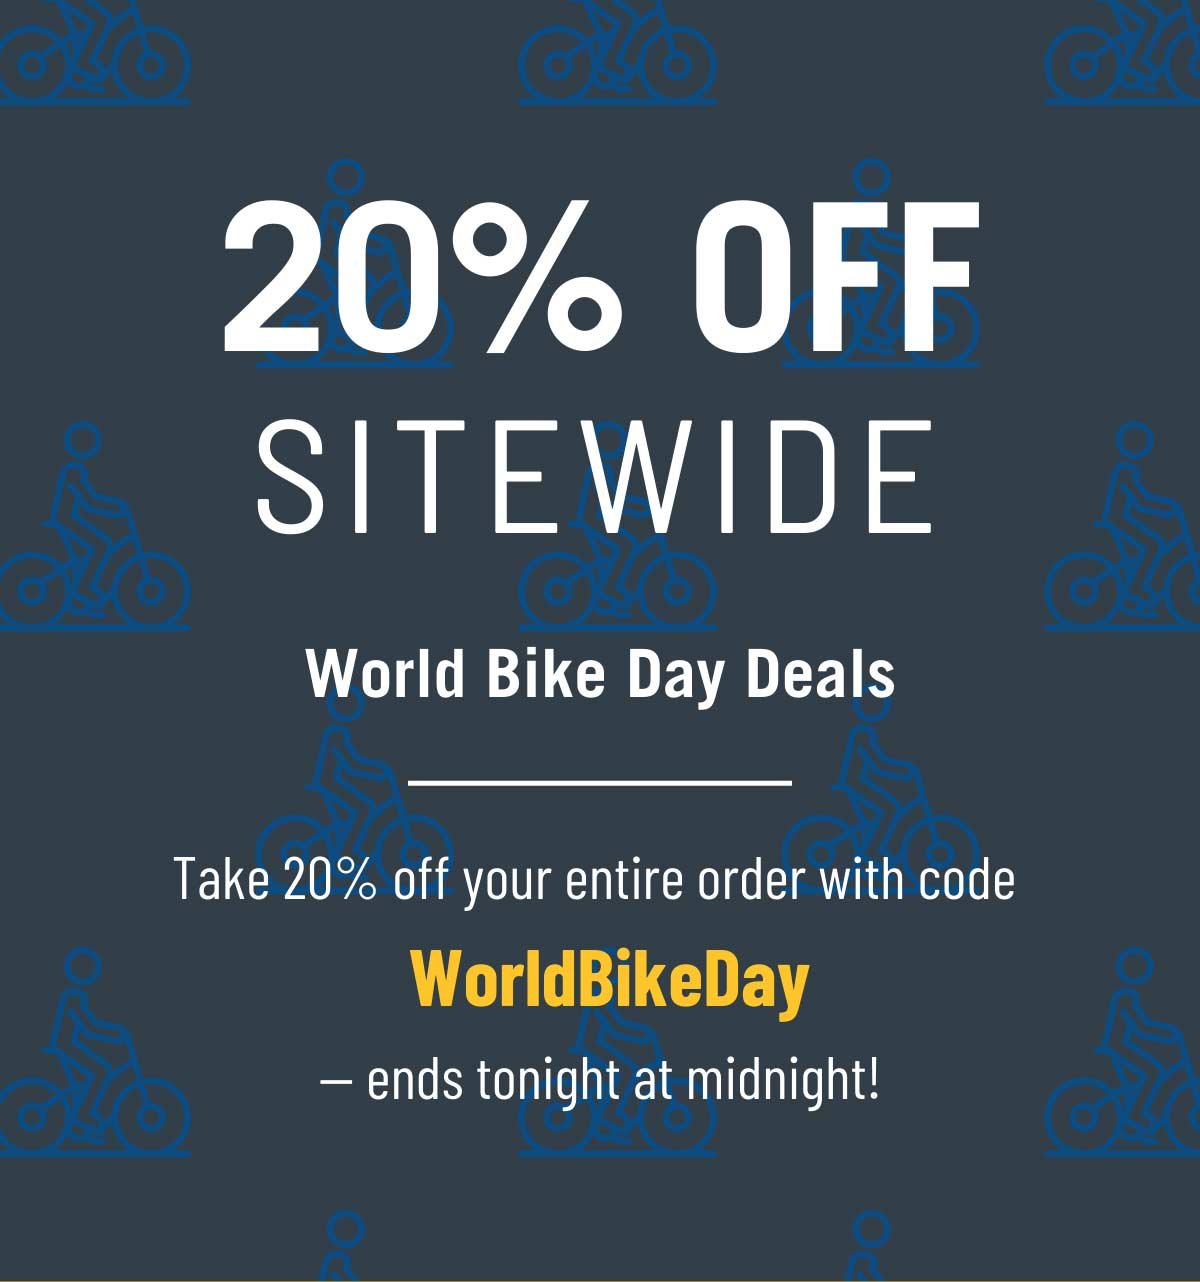 20% Off Sitewide. World Bike Day Deals. Take 20% off your entire order with code WorldBikeDay - ends tonight at midnight!